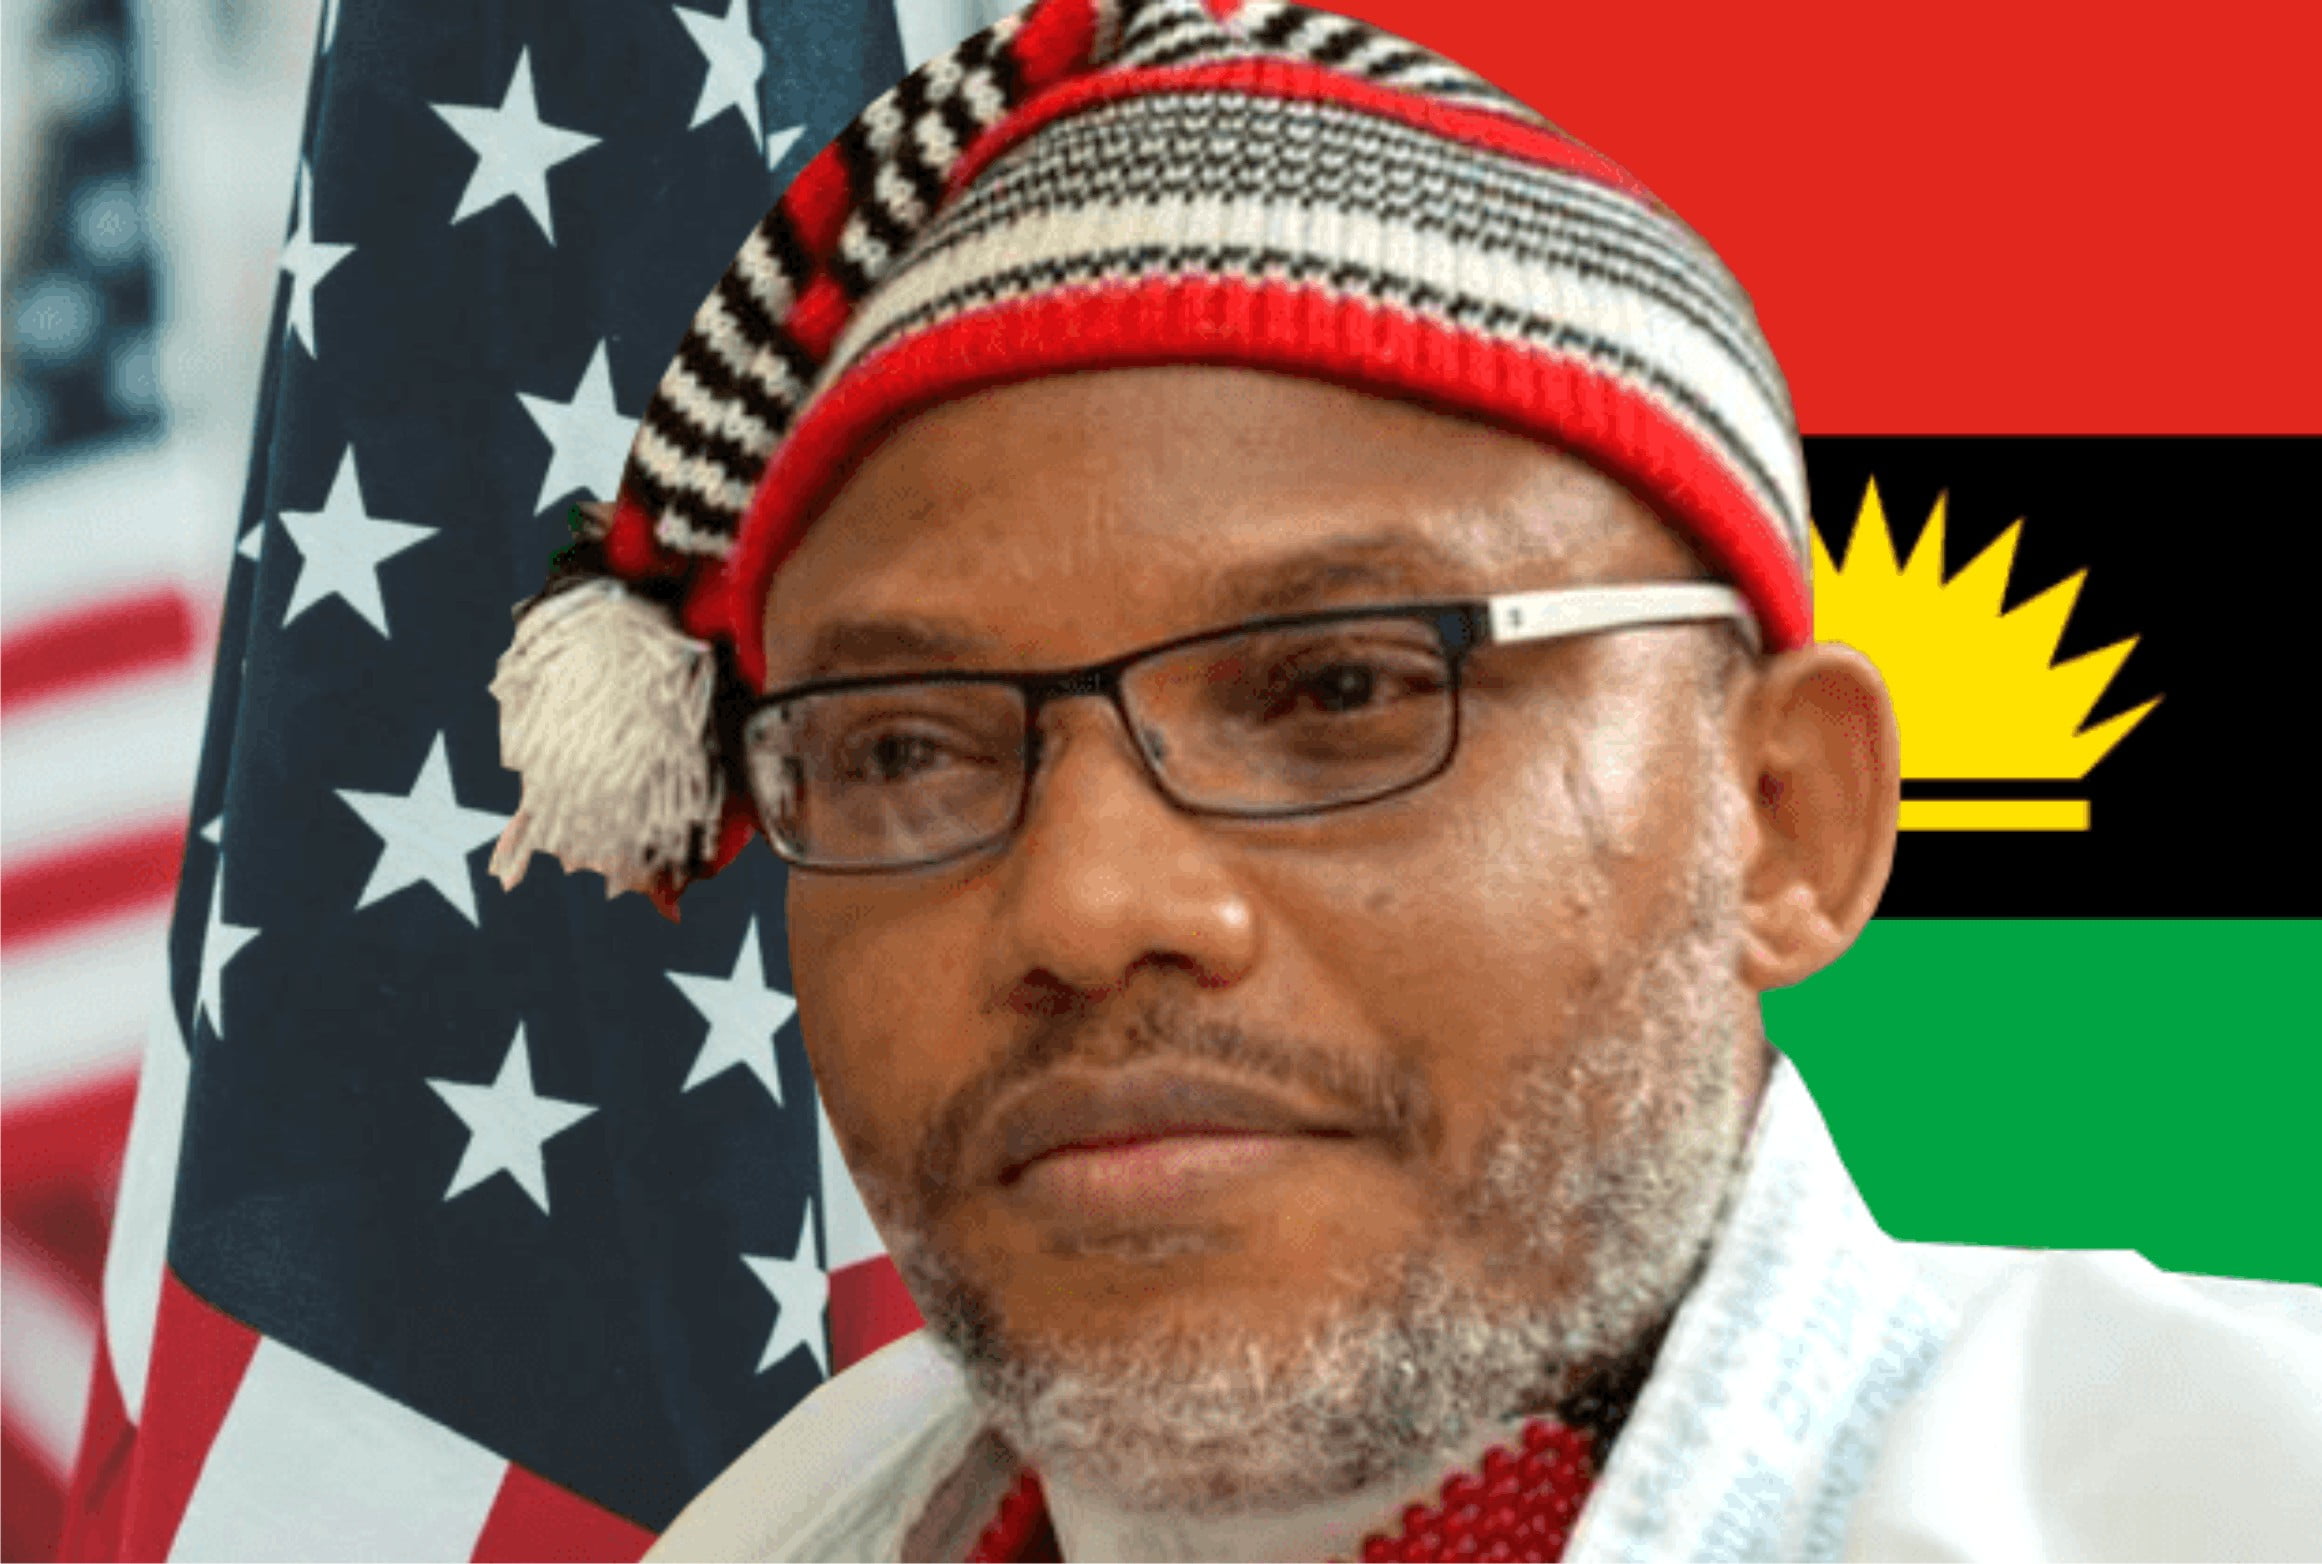 Reps panel call for release of IPOB leader, Nnamdi Kanu